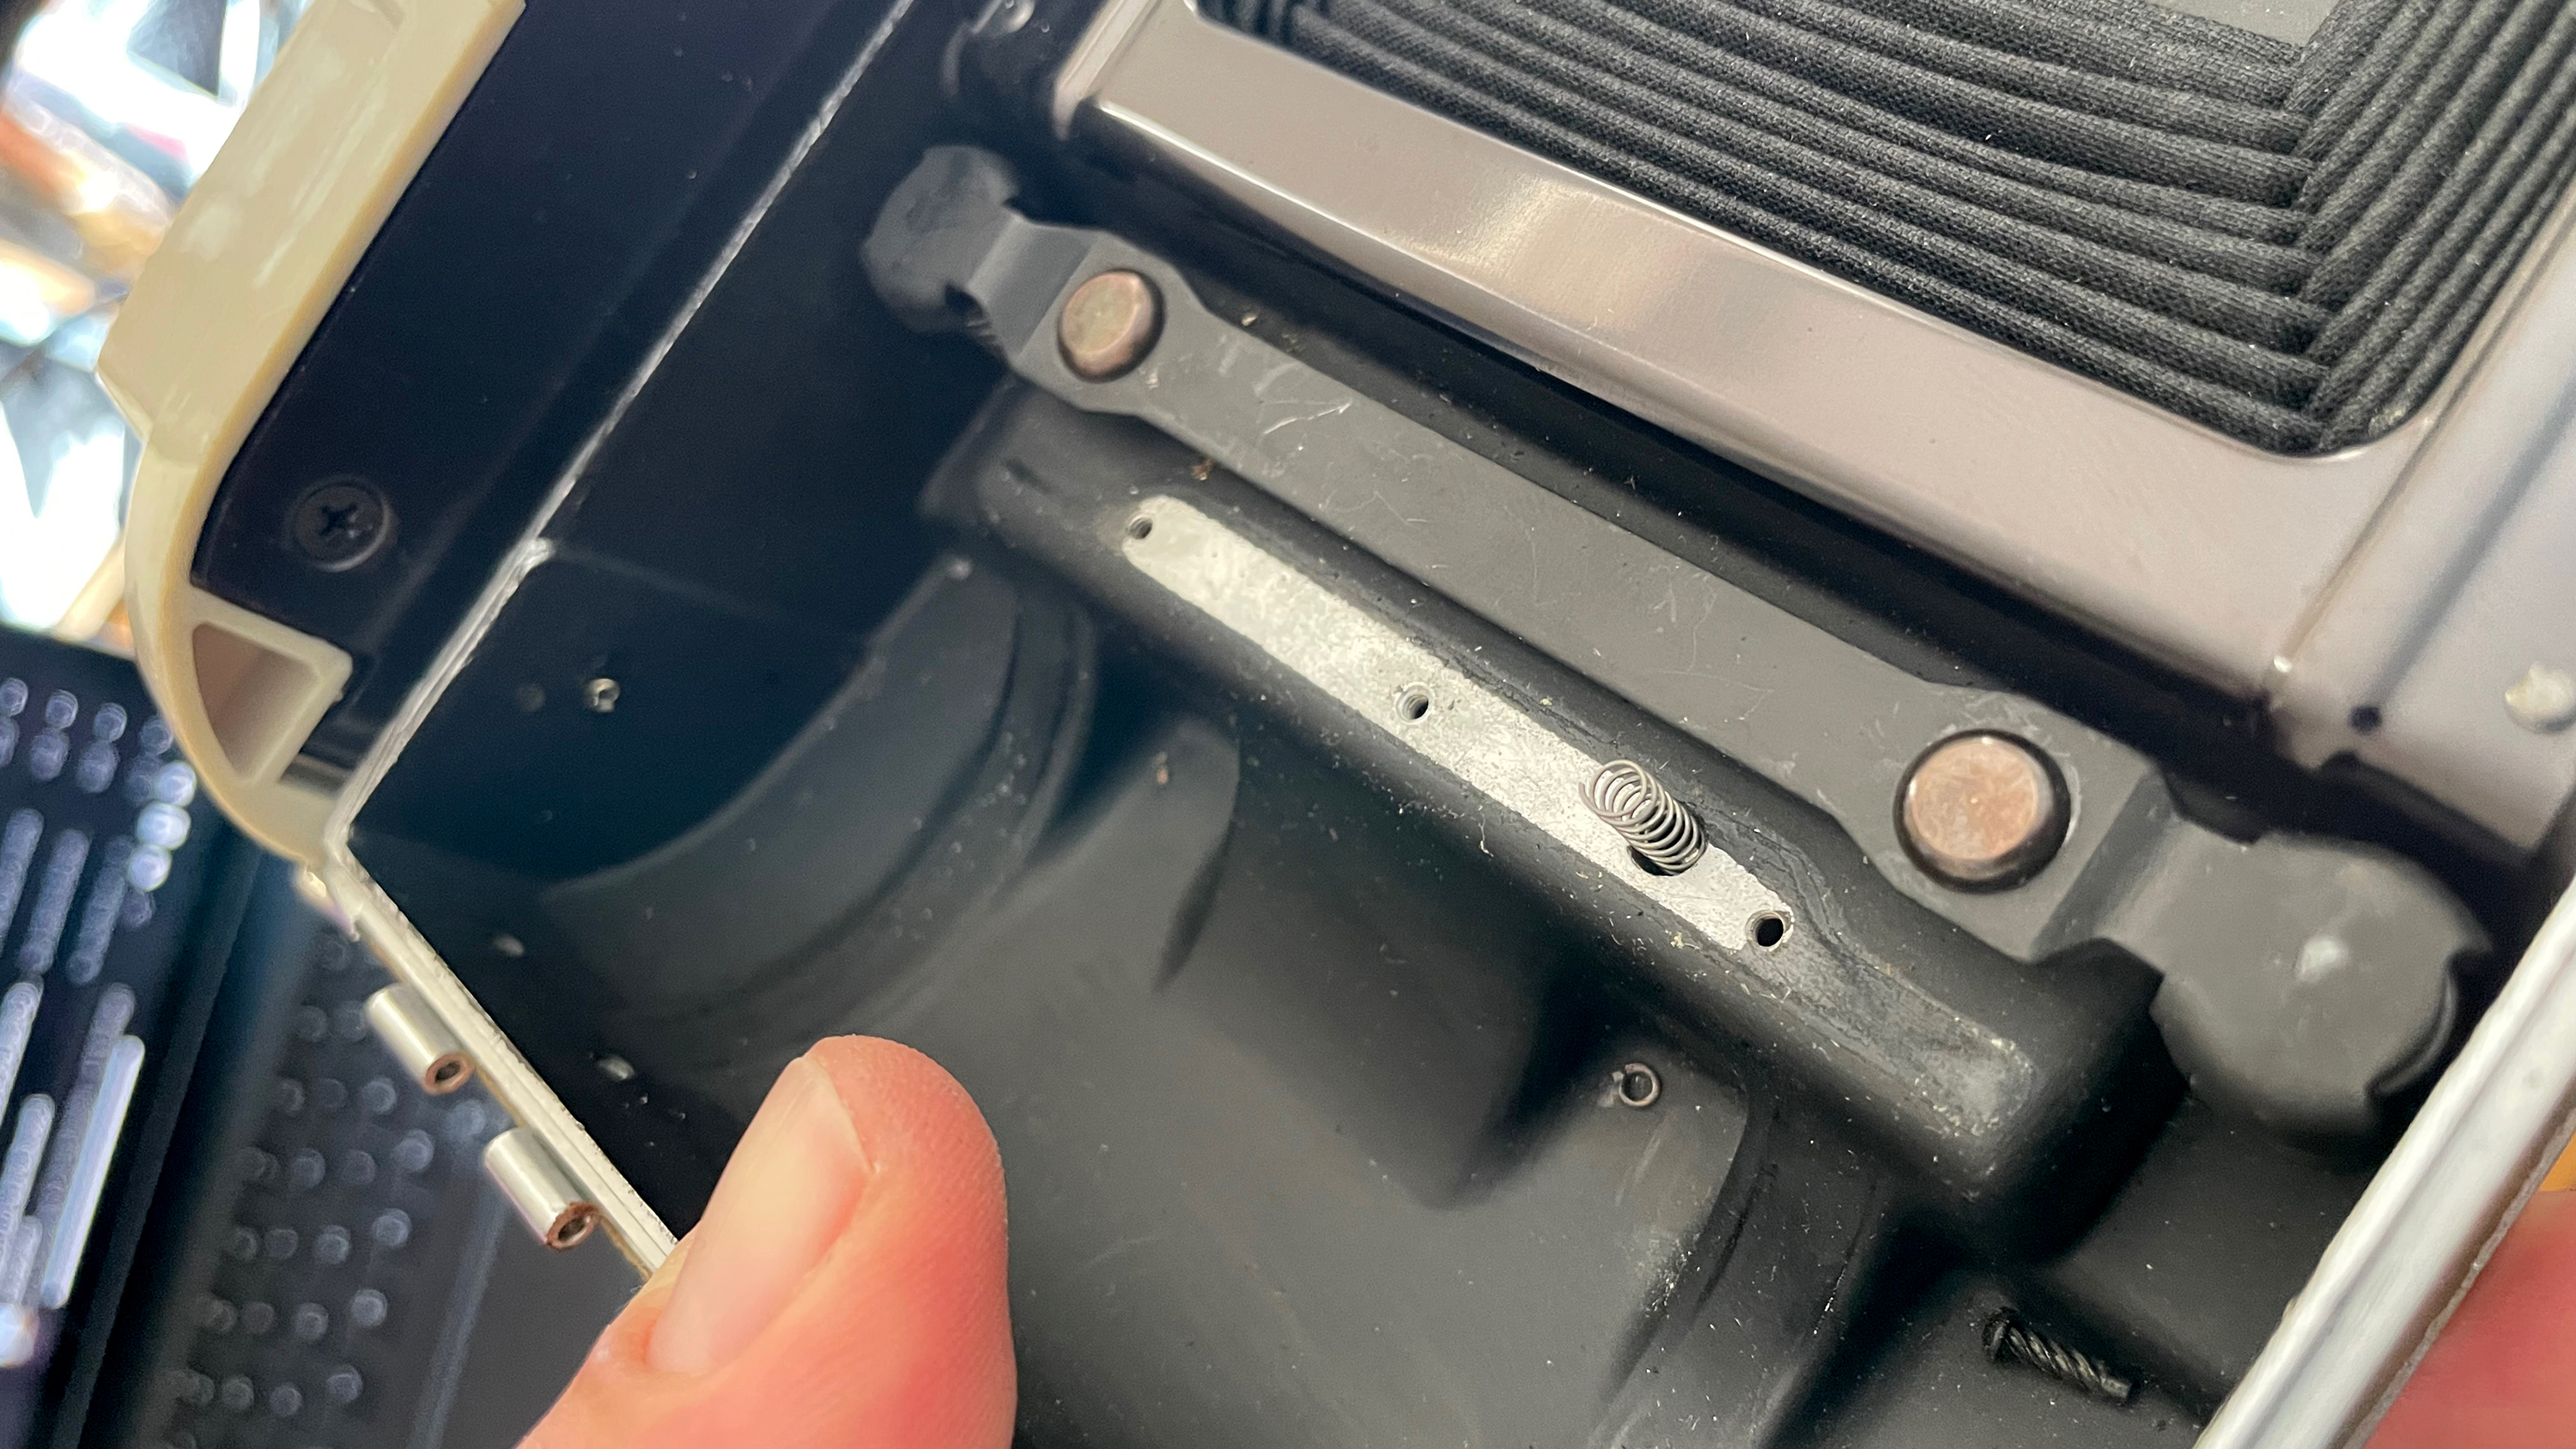 800: Pin and spring after film holder removal